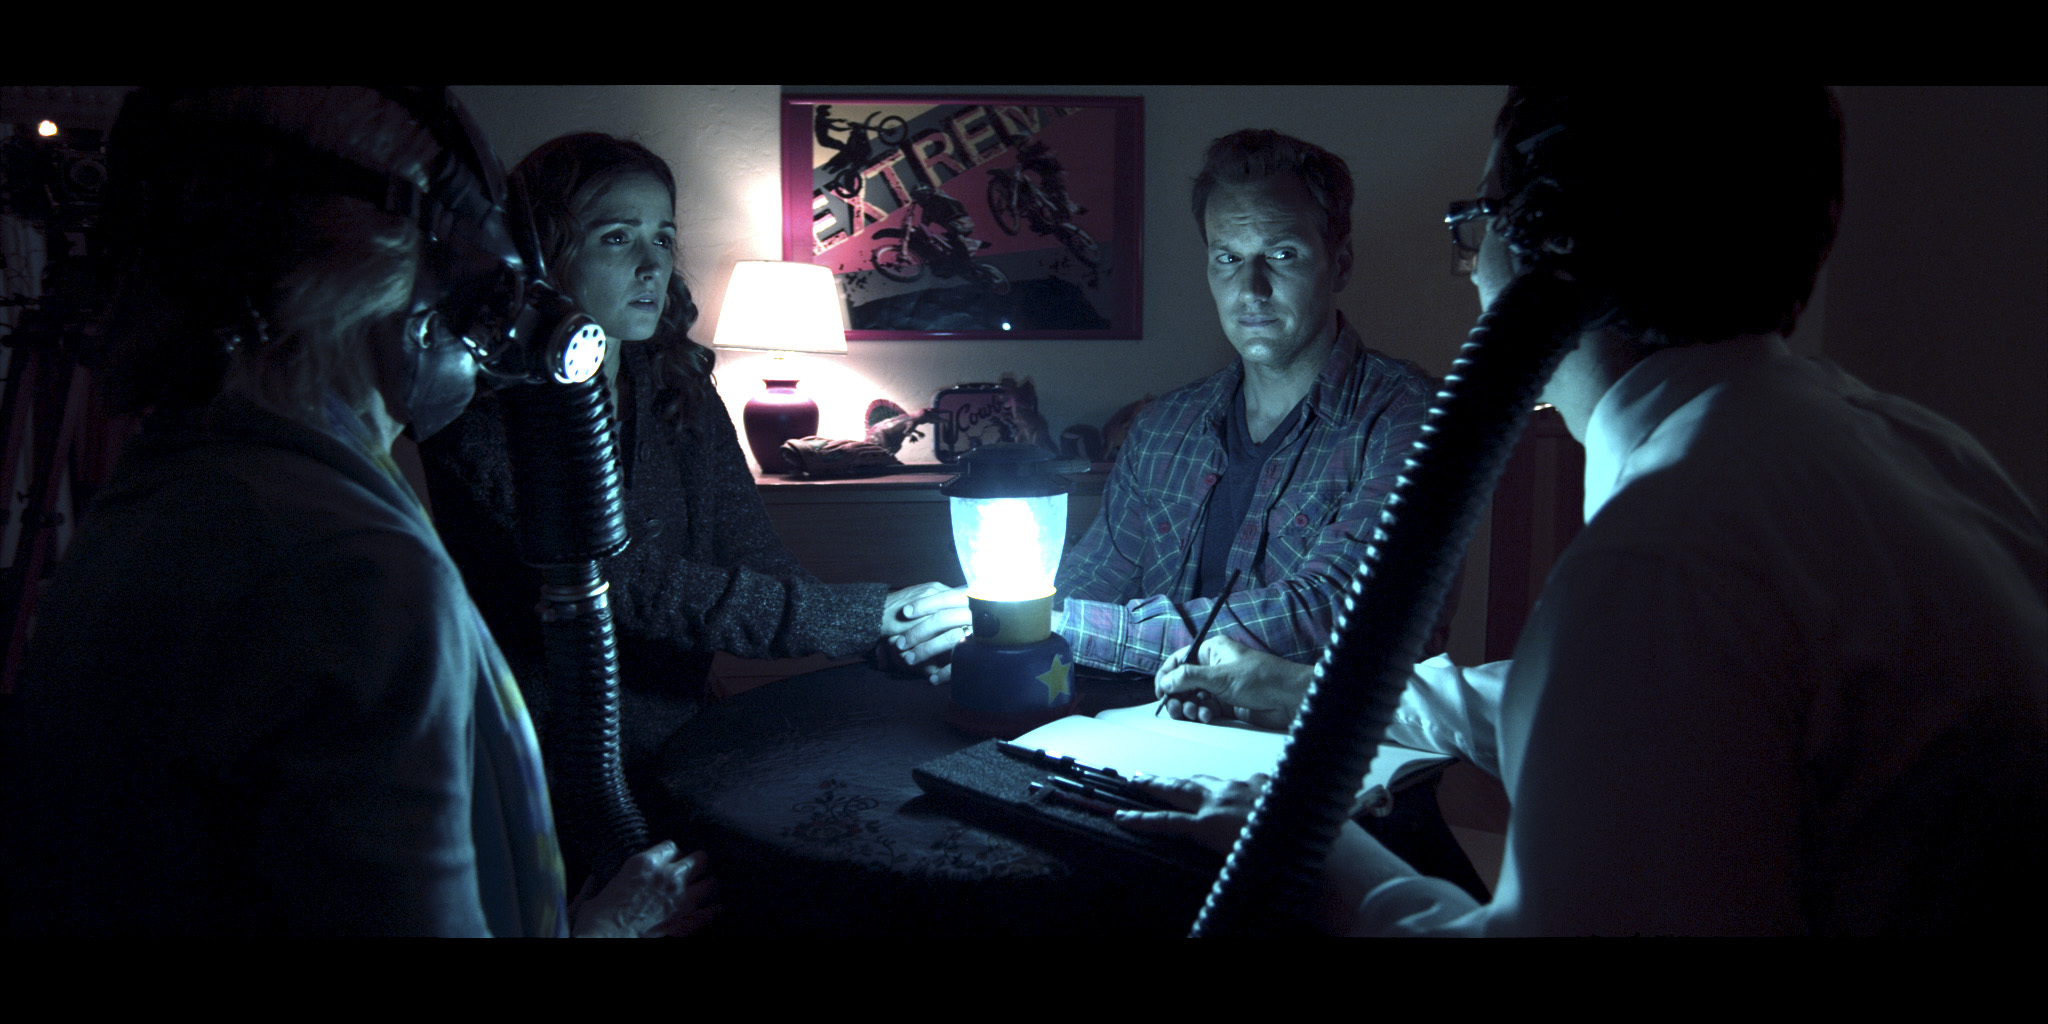 Still of Lin Shaye, Rose Byrne, Patrick Wilson and Leigh Whannell in Tunas tamsoje (2010)